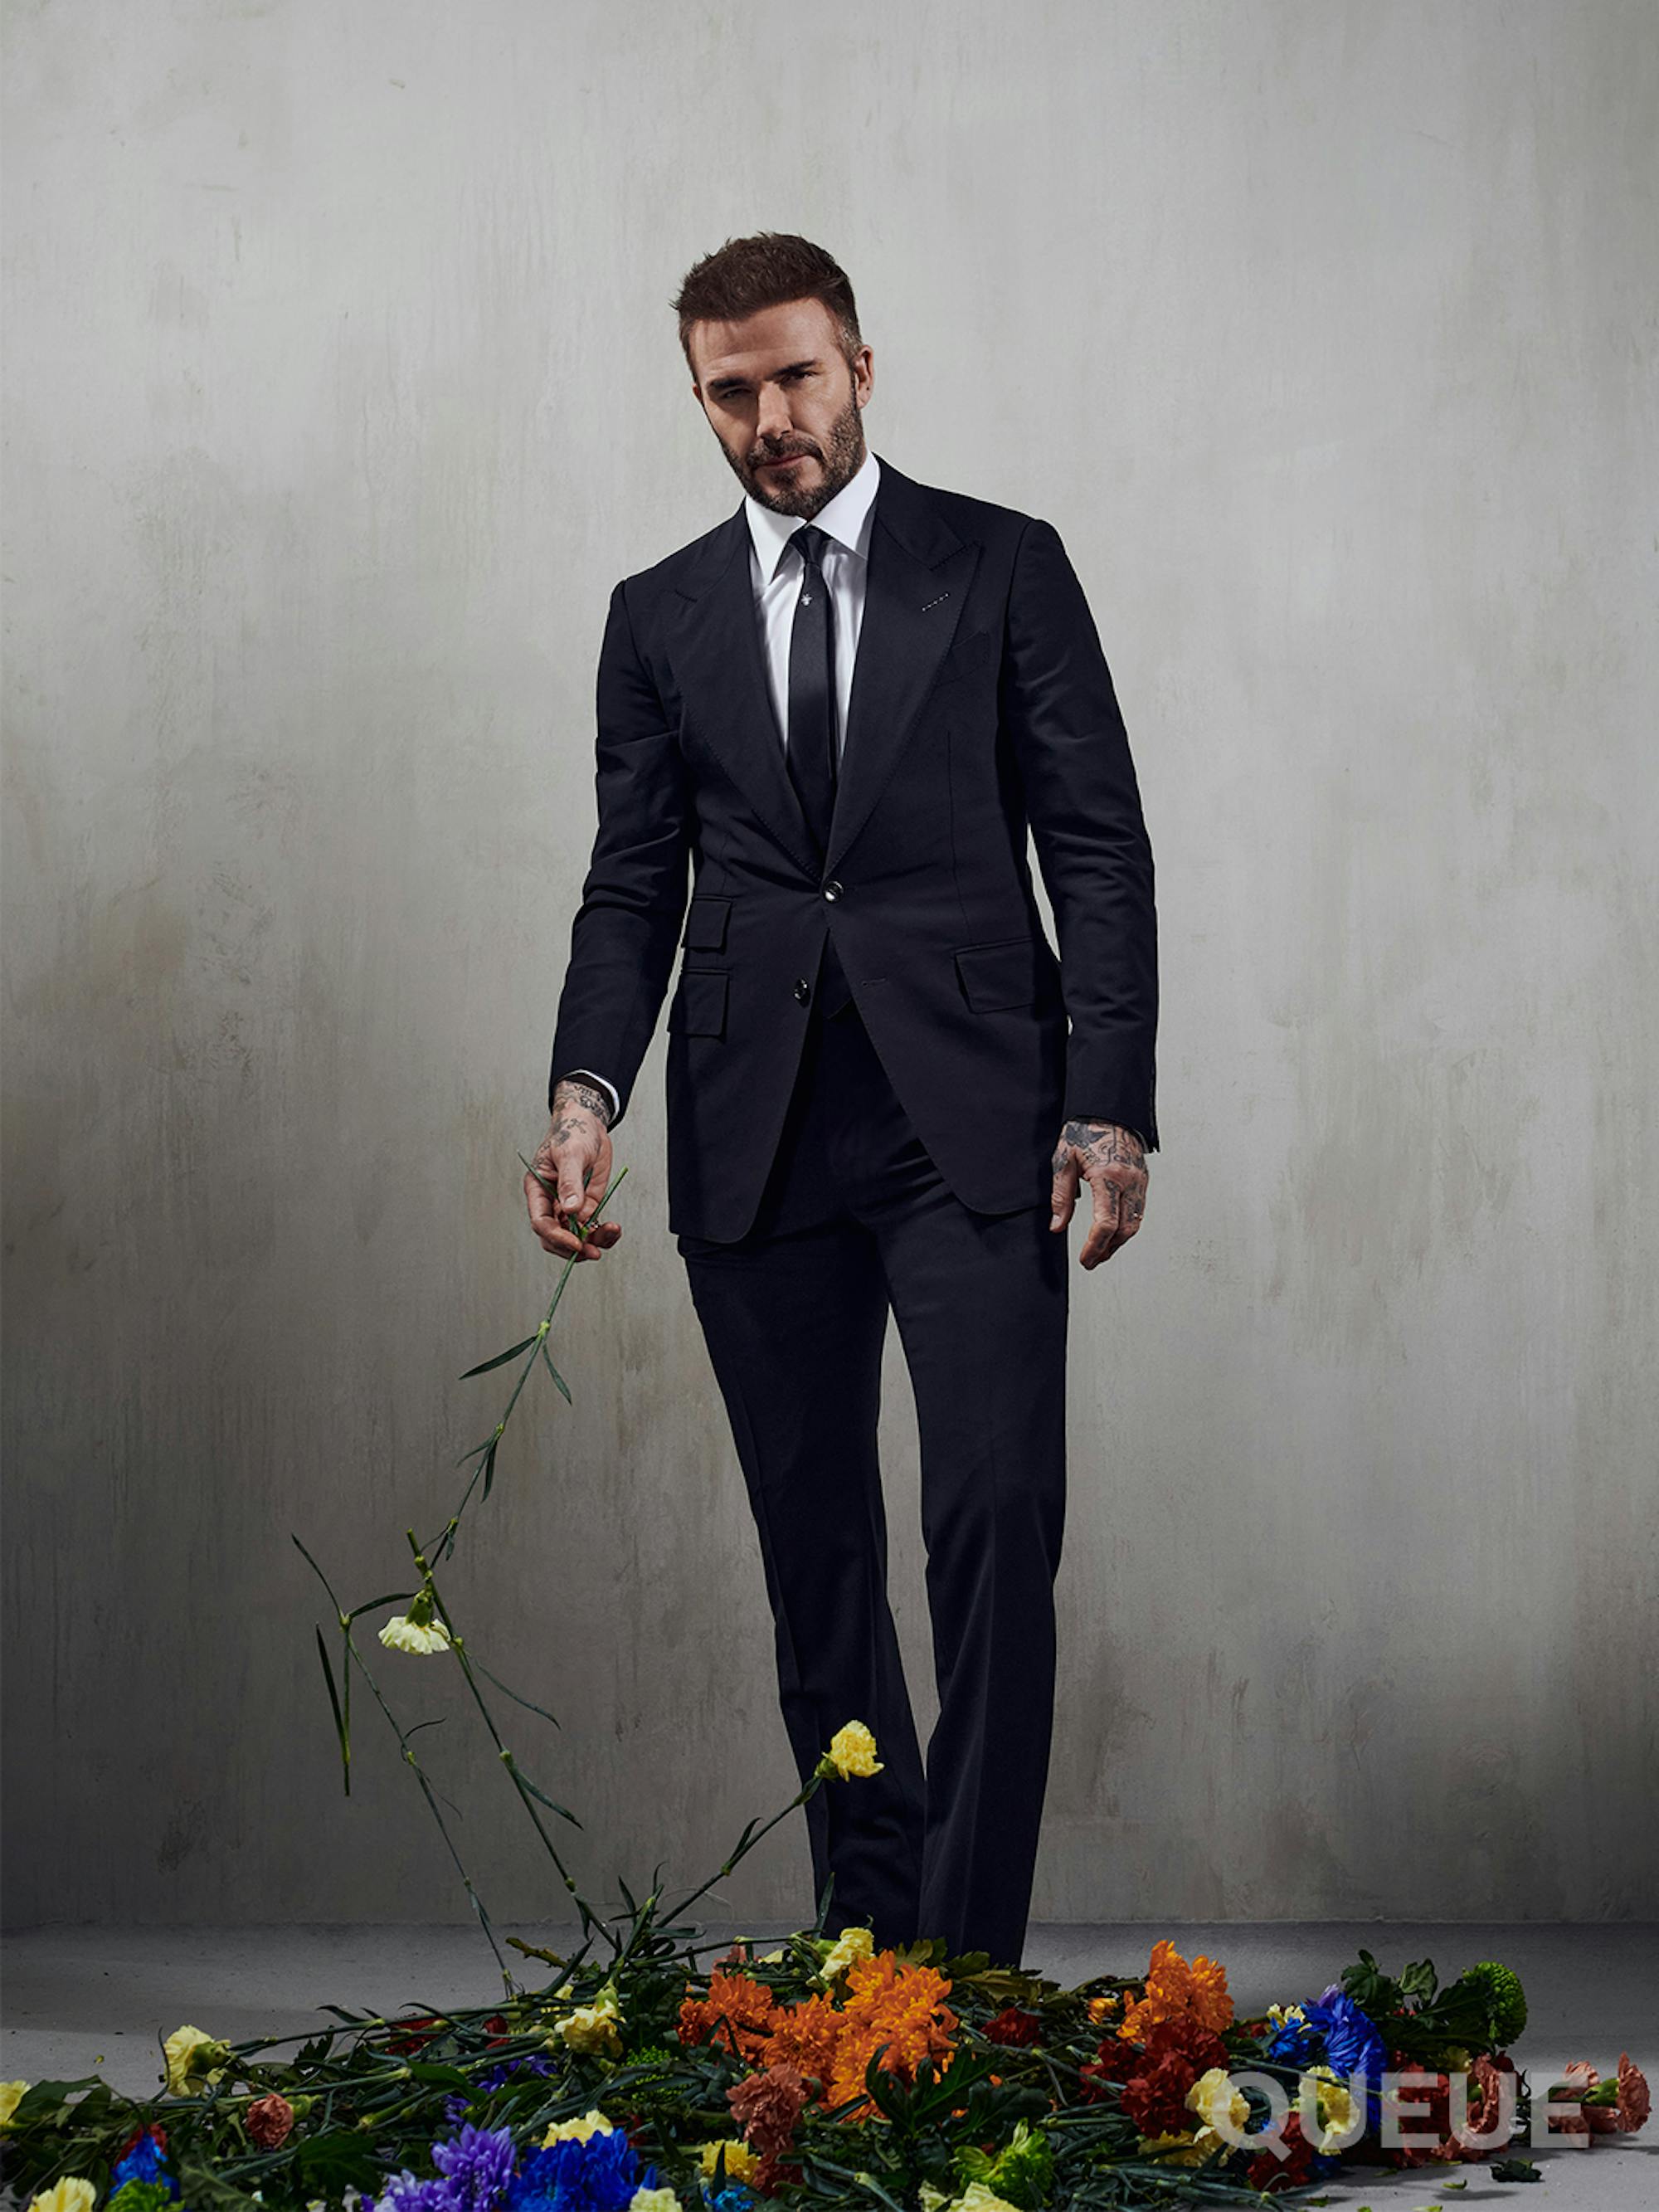 David Beckham wears a suit and walks through a pile of flowers in a gray-walled room.